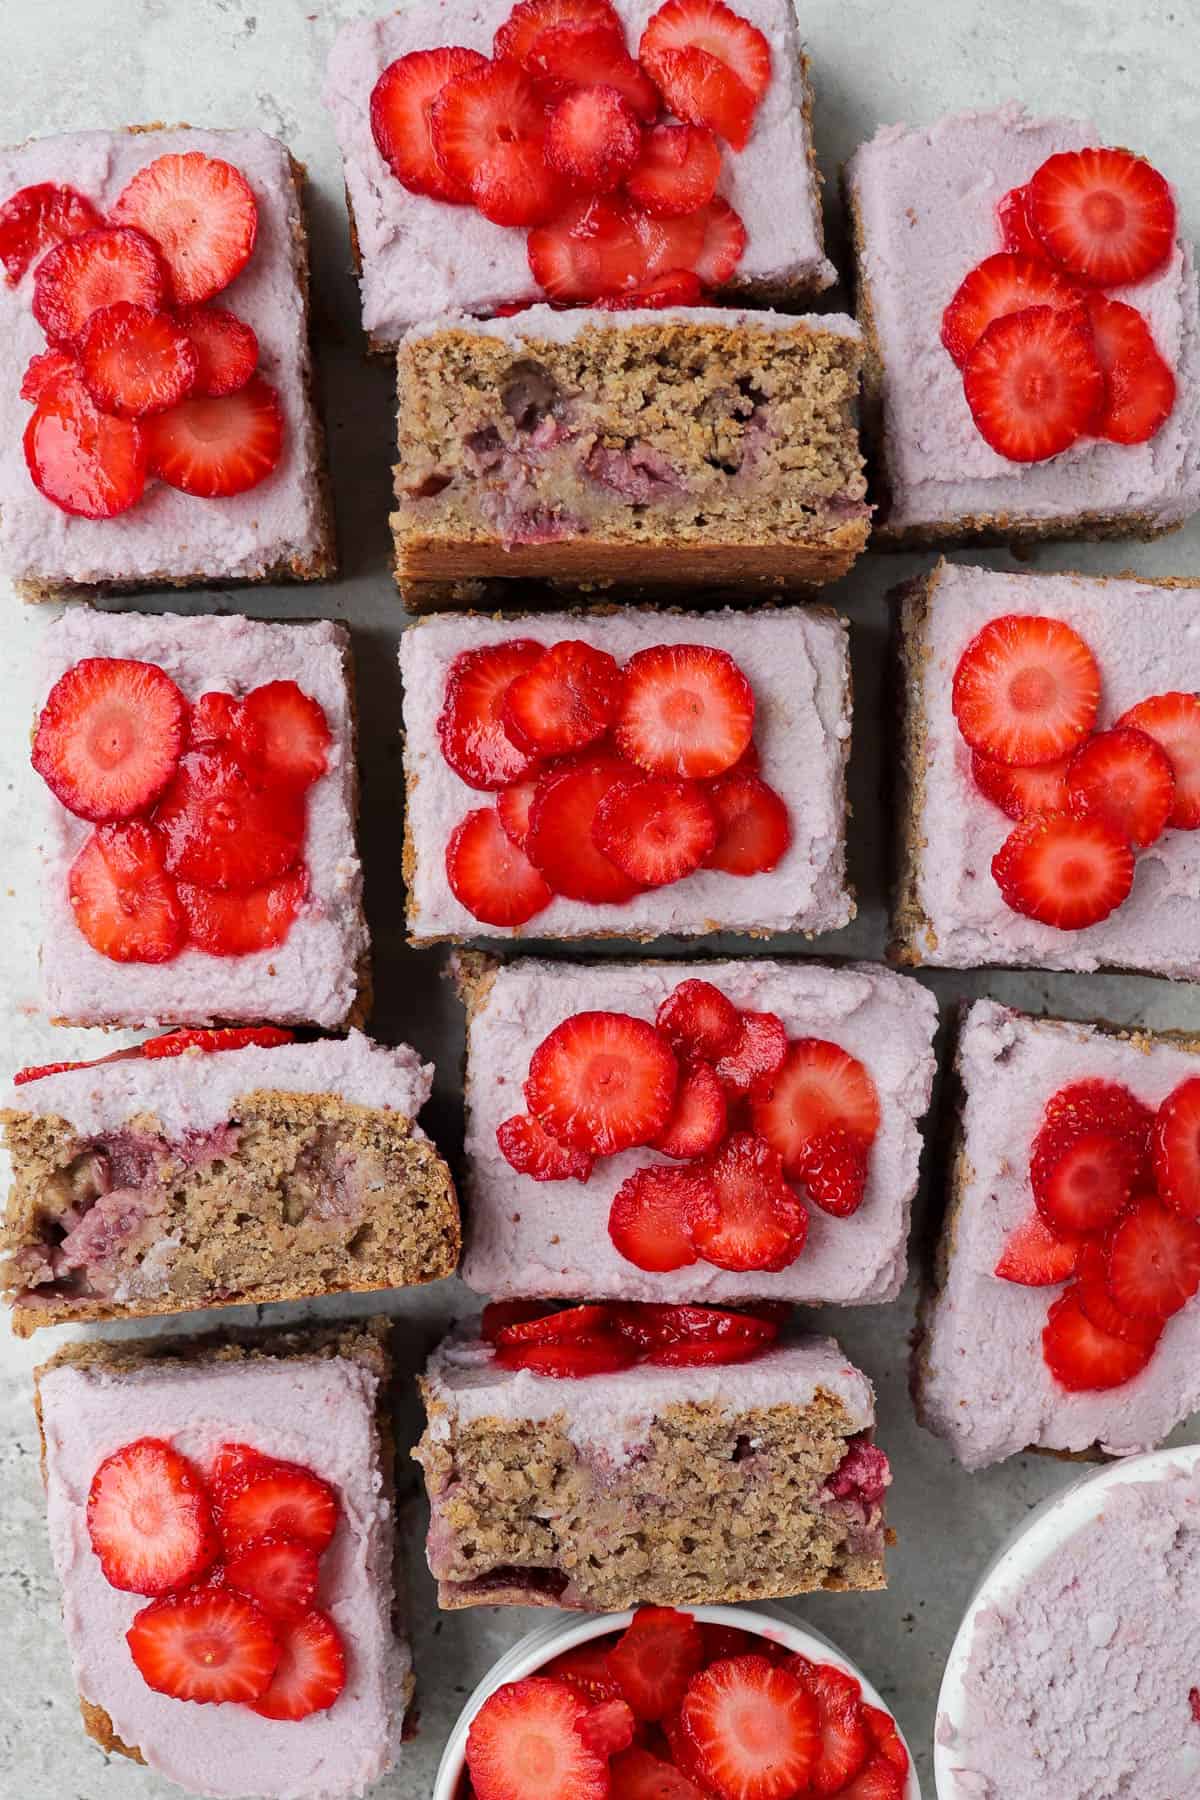 Frosted cake topped with sliced strawberries and cut up into small rectangle slices. Three slices turned on the side or an inside view.